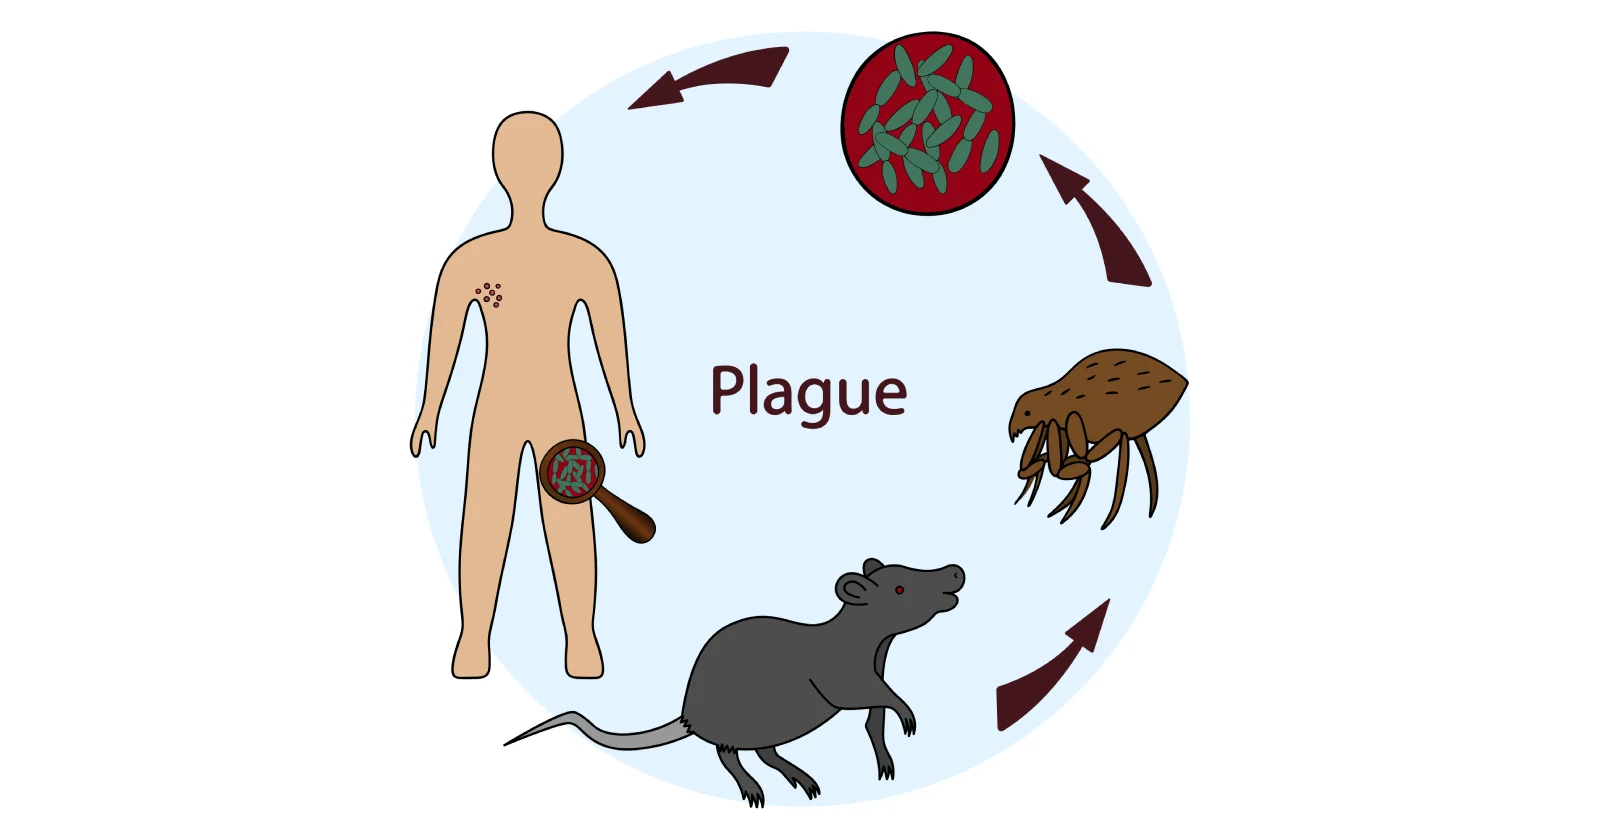 Overview of the Plague: Understanding the symptoms and causes